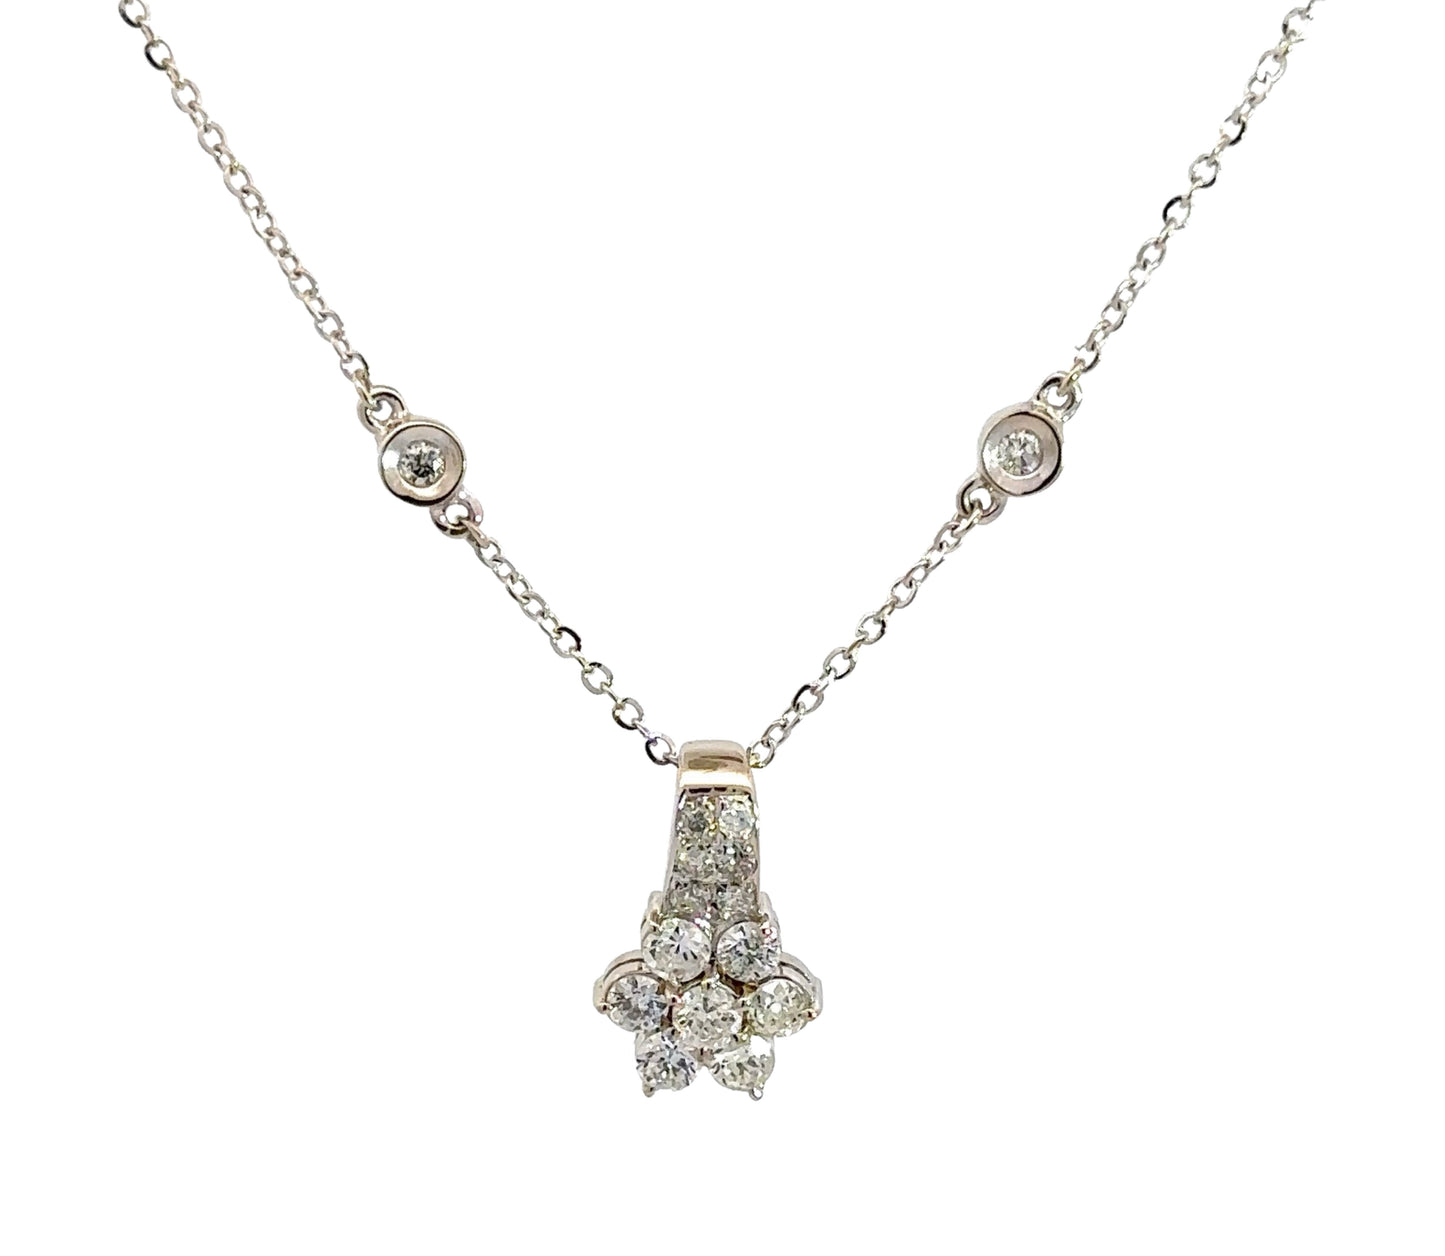 Diamond flower necklace with floral design as the drop and bezel-set diamonds by the yard on the chain